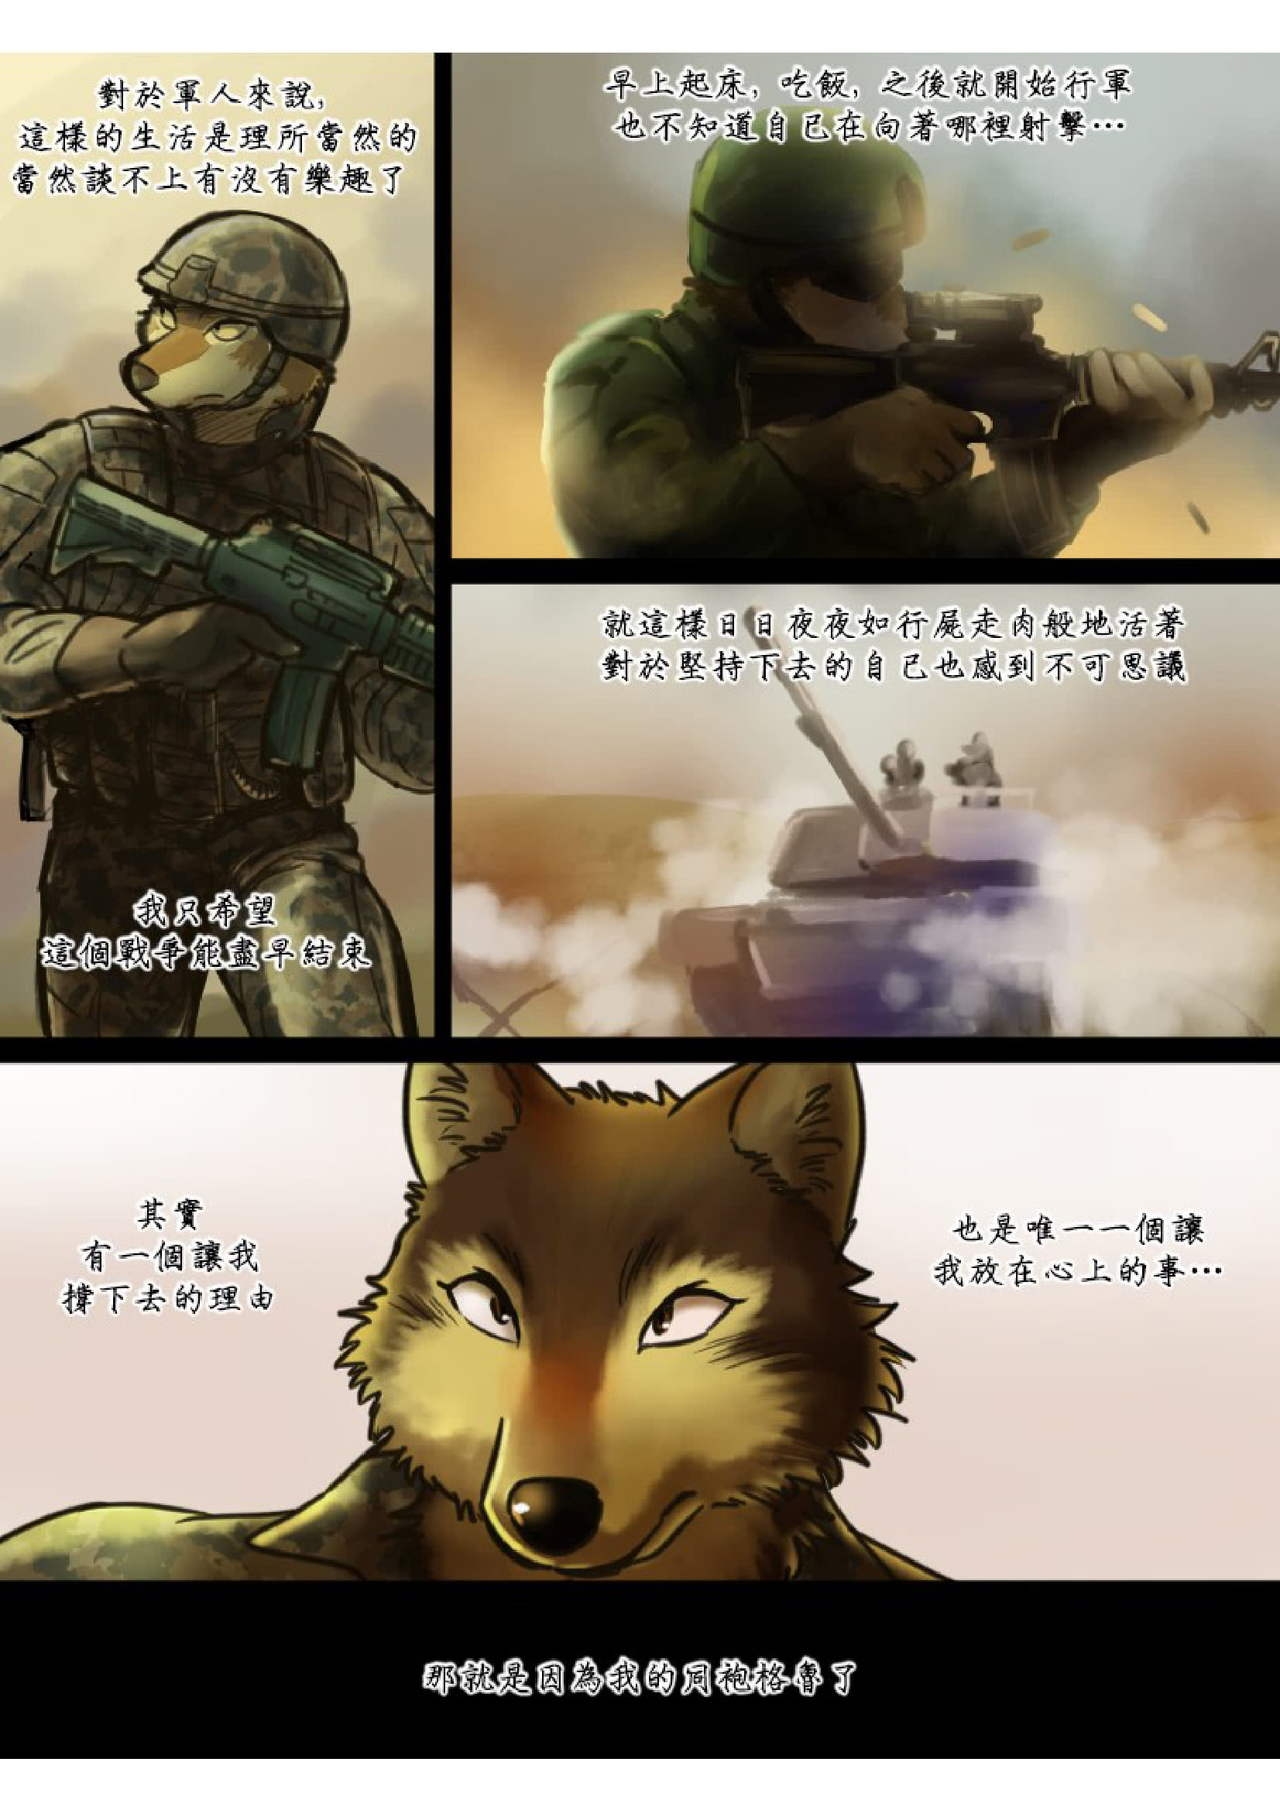 [Maririn] Brothers In Arms [Chinese] 2